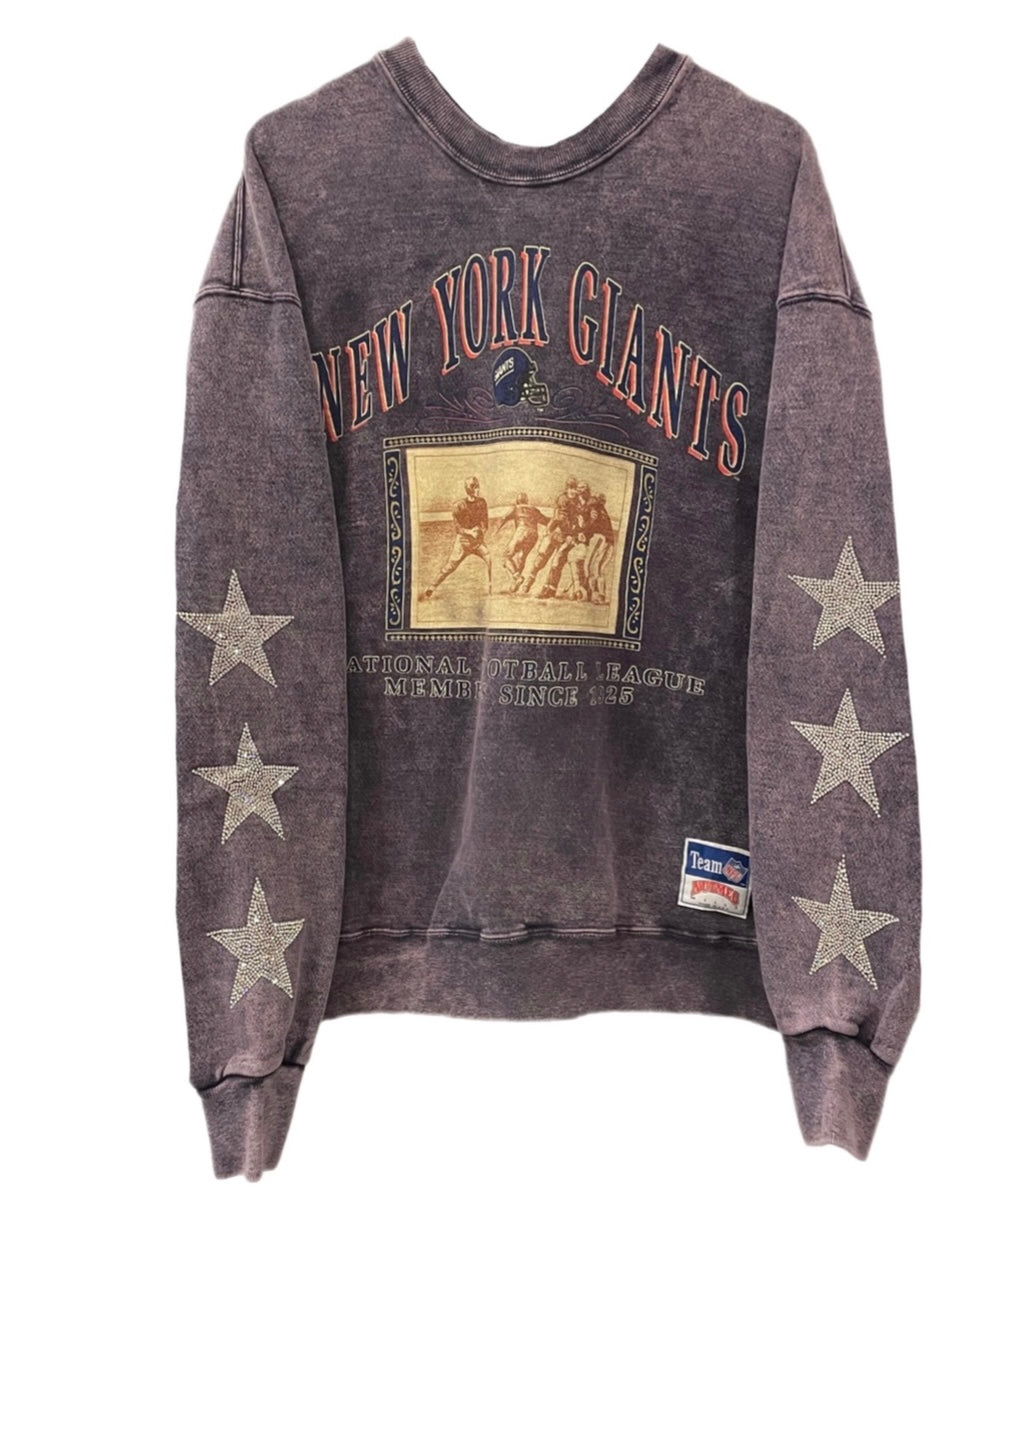 NY Giants, NFL One of a KIND Vintage Sweatshirt with Three Crystal Star Design.